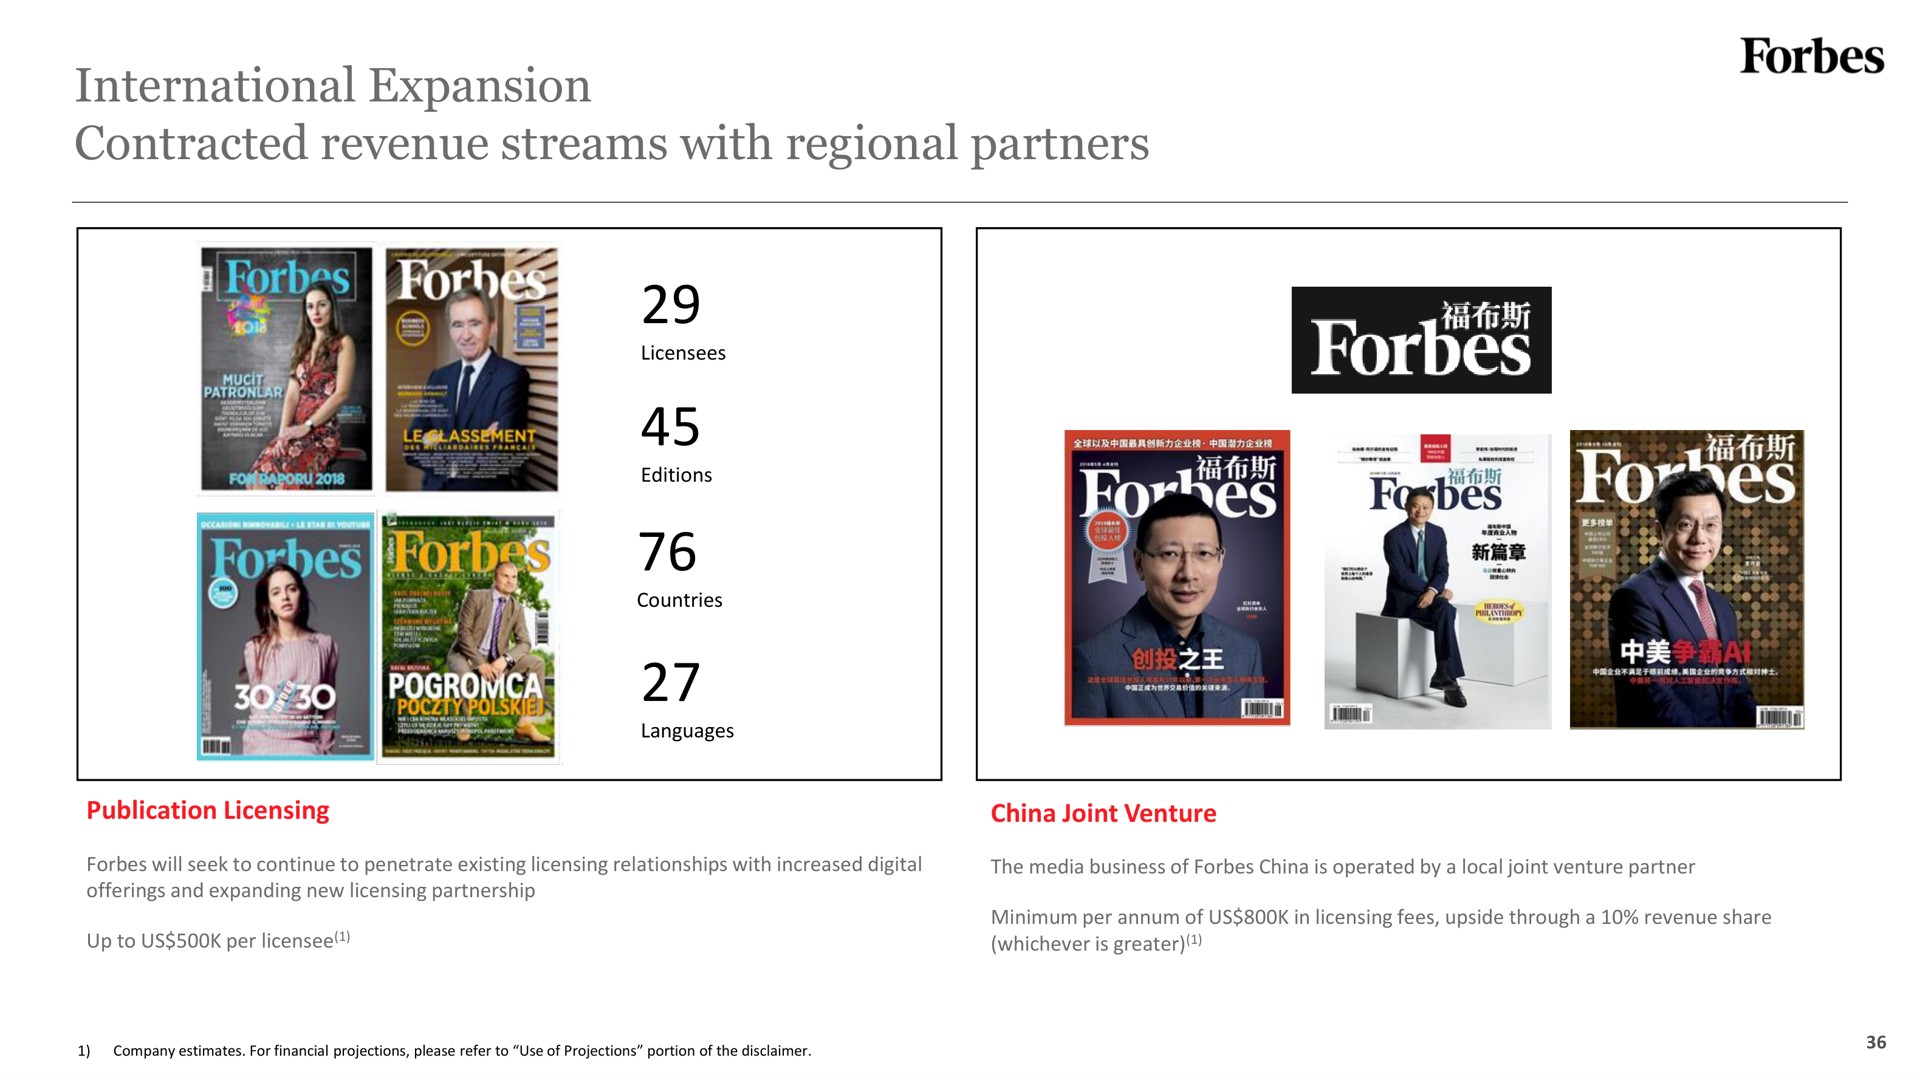 international expansion contracted revenue streams with regional partners | Forbes